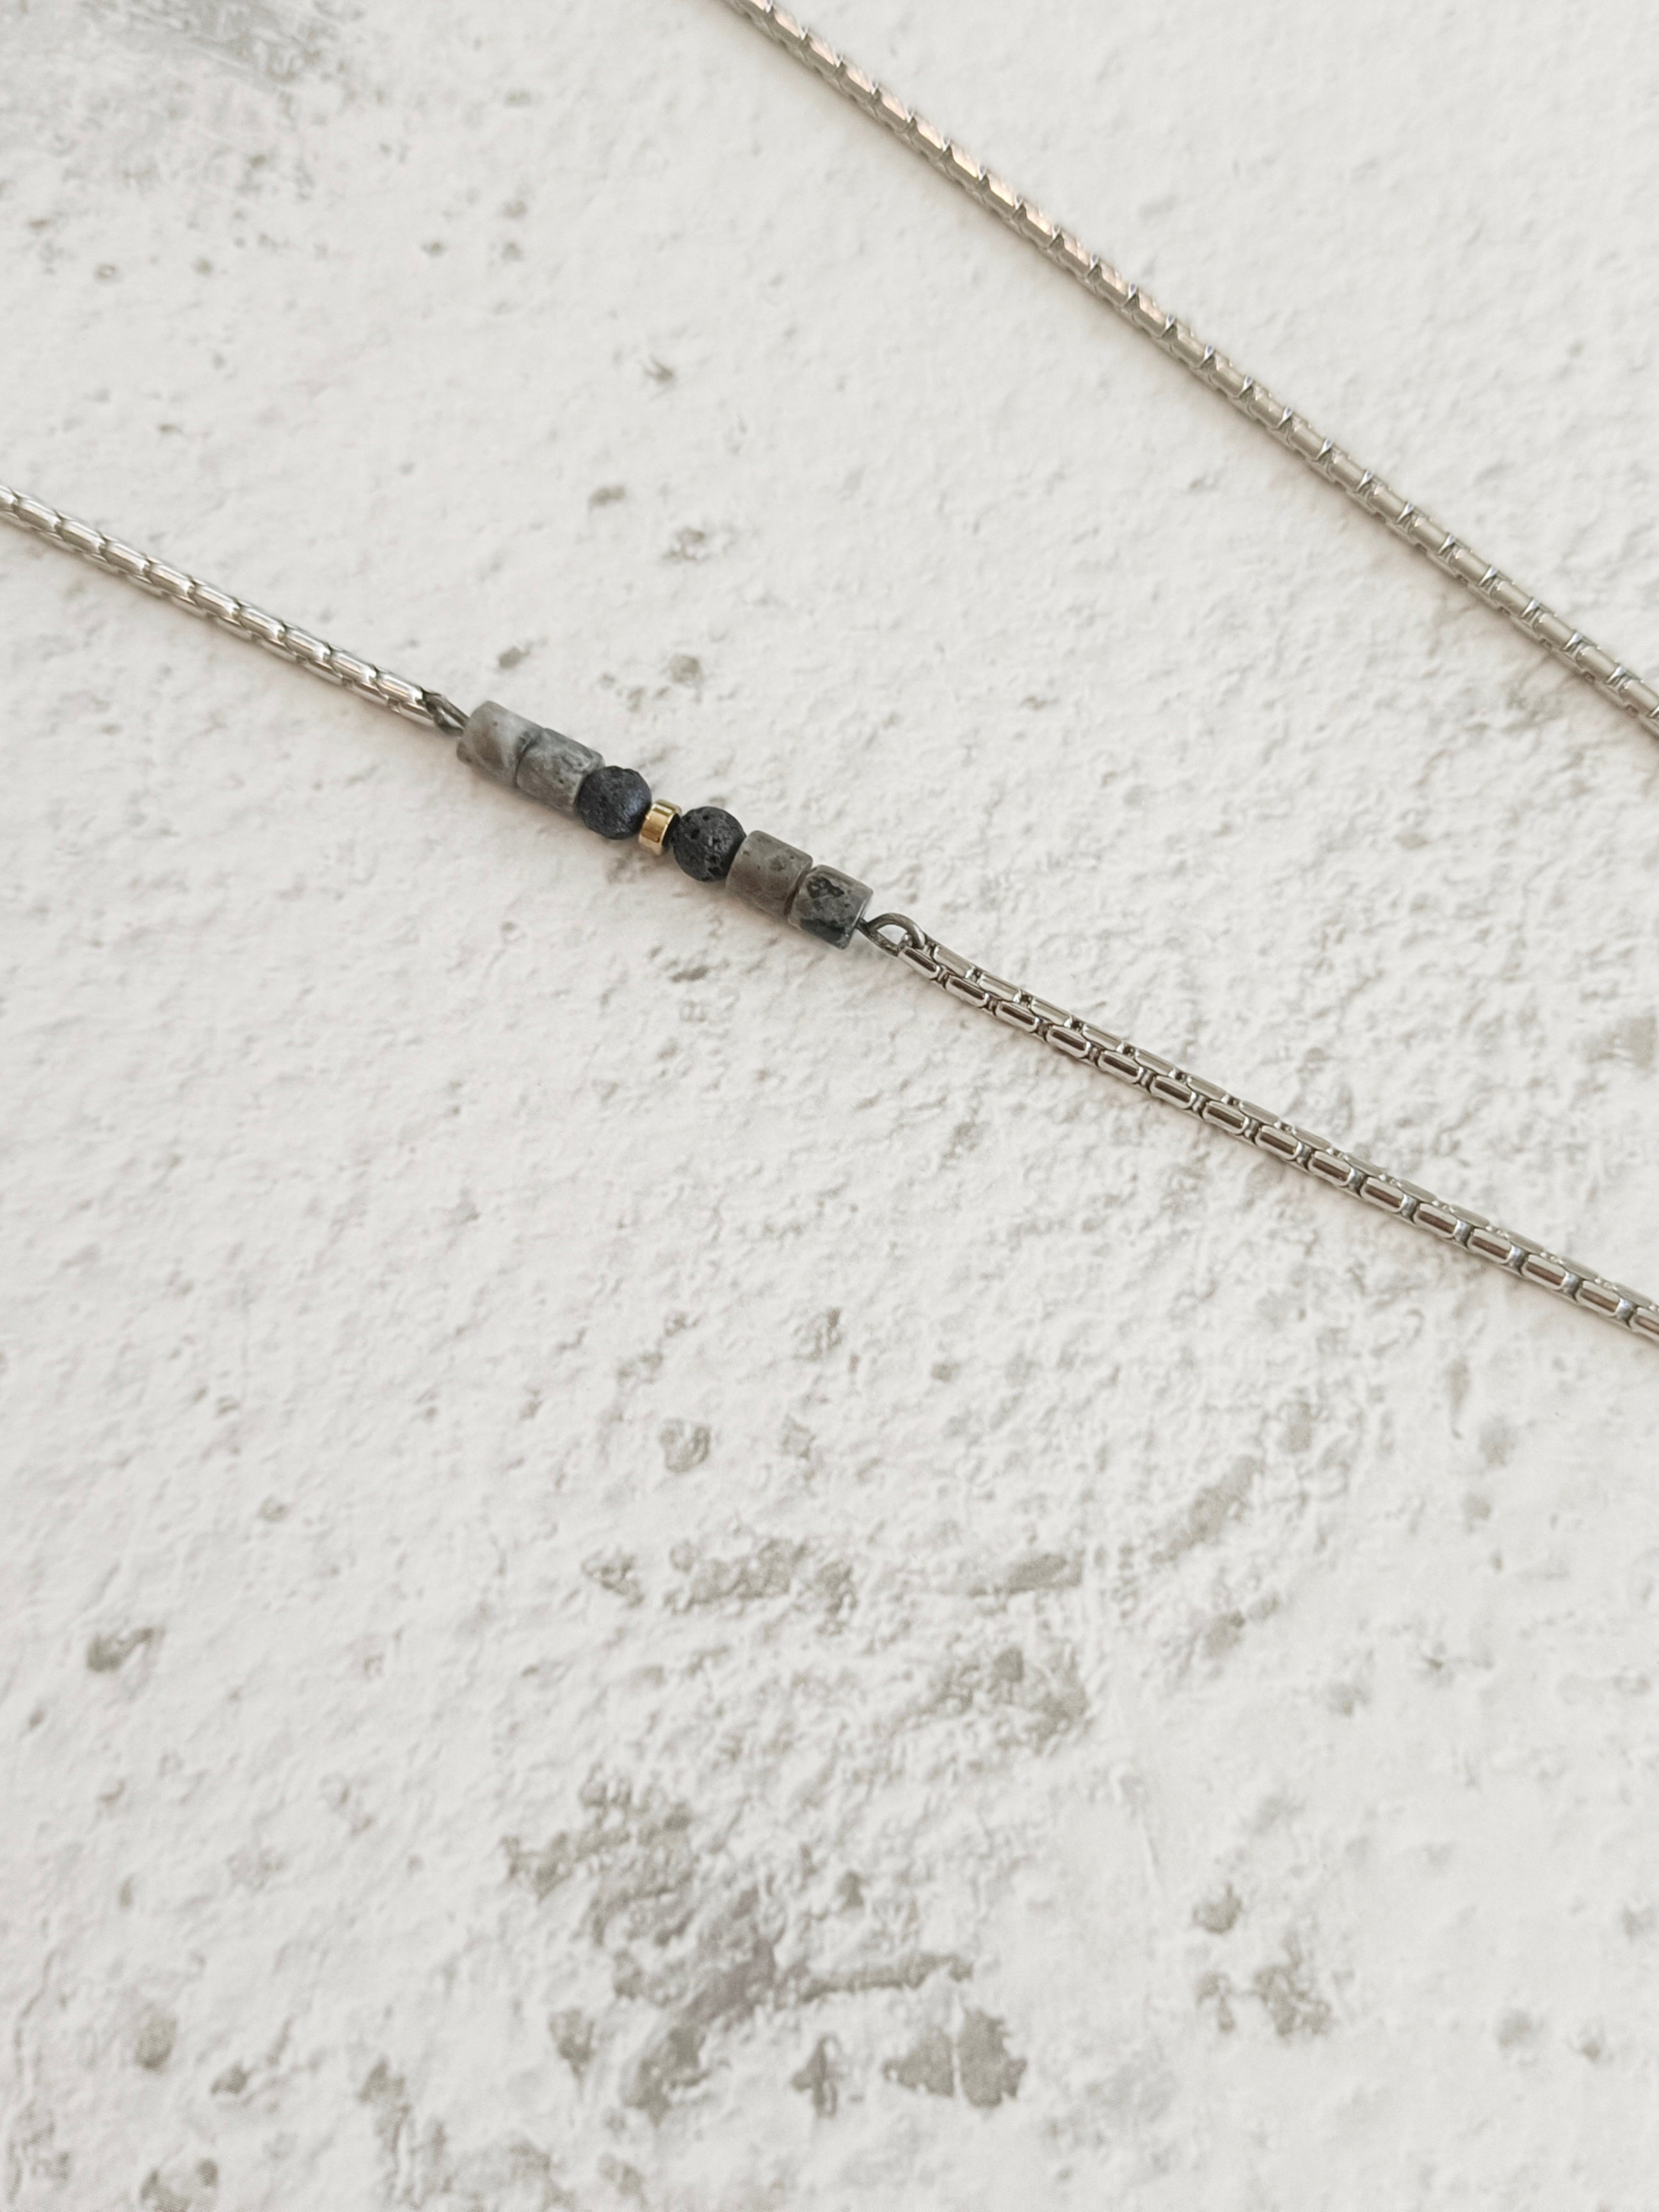 Holidays Rounded stainless steel necklace combined with stones and geometric elements